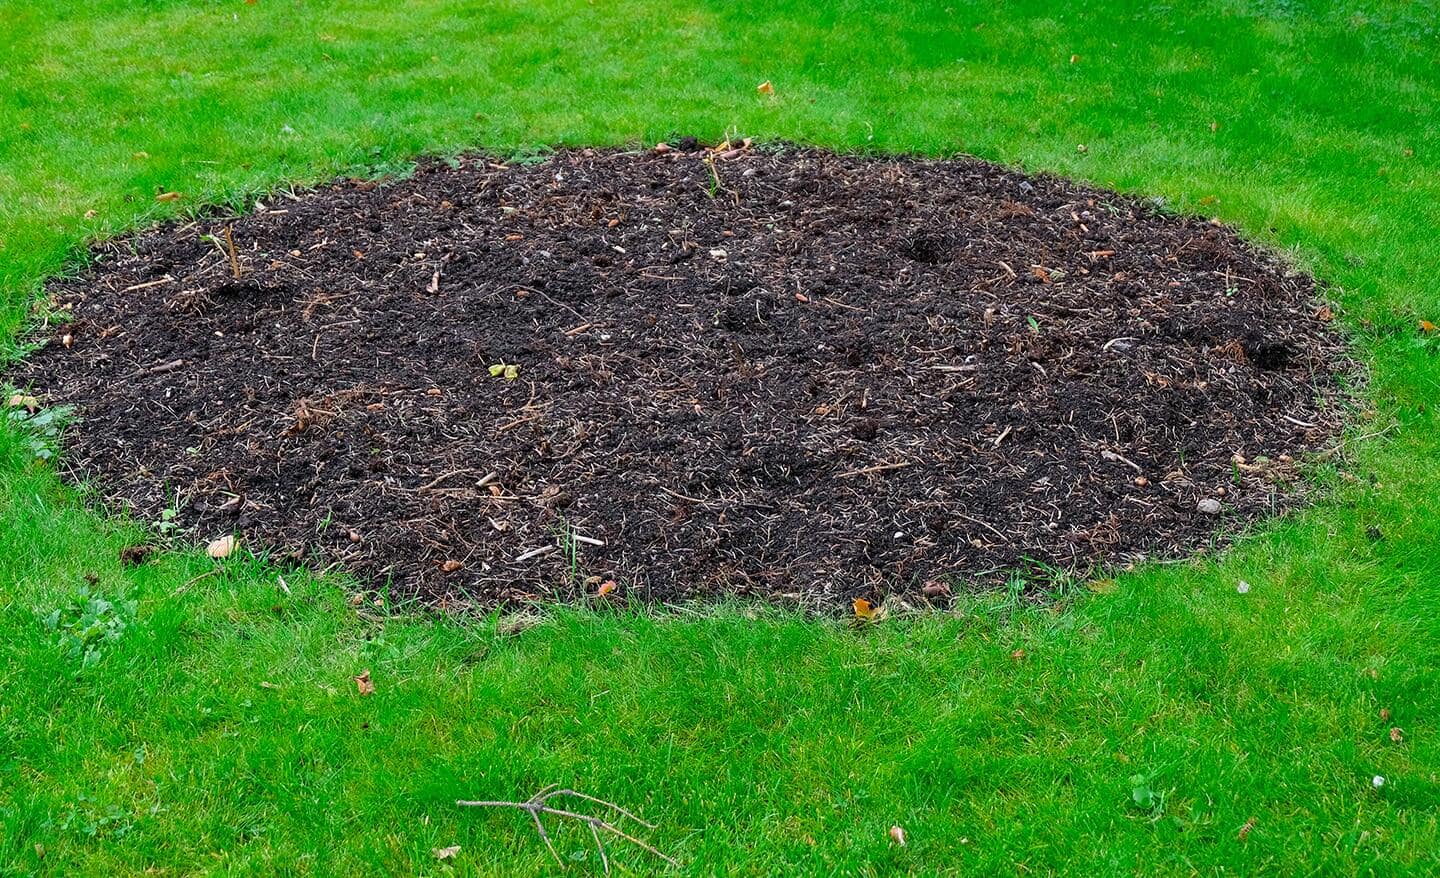 Compost on a green lawn